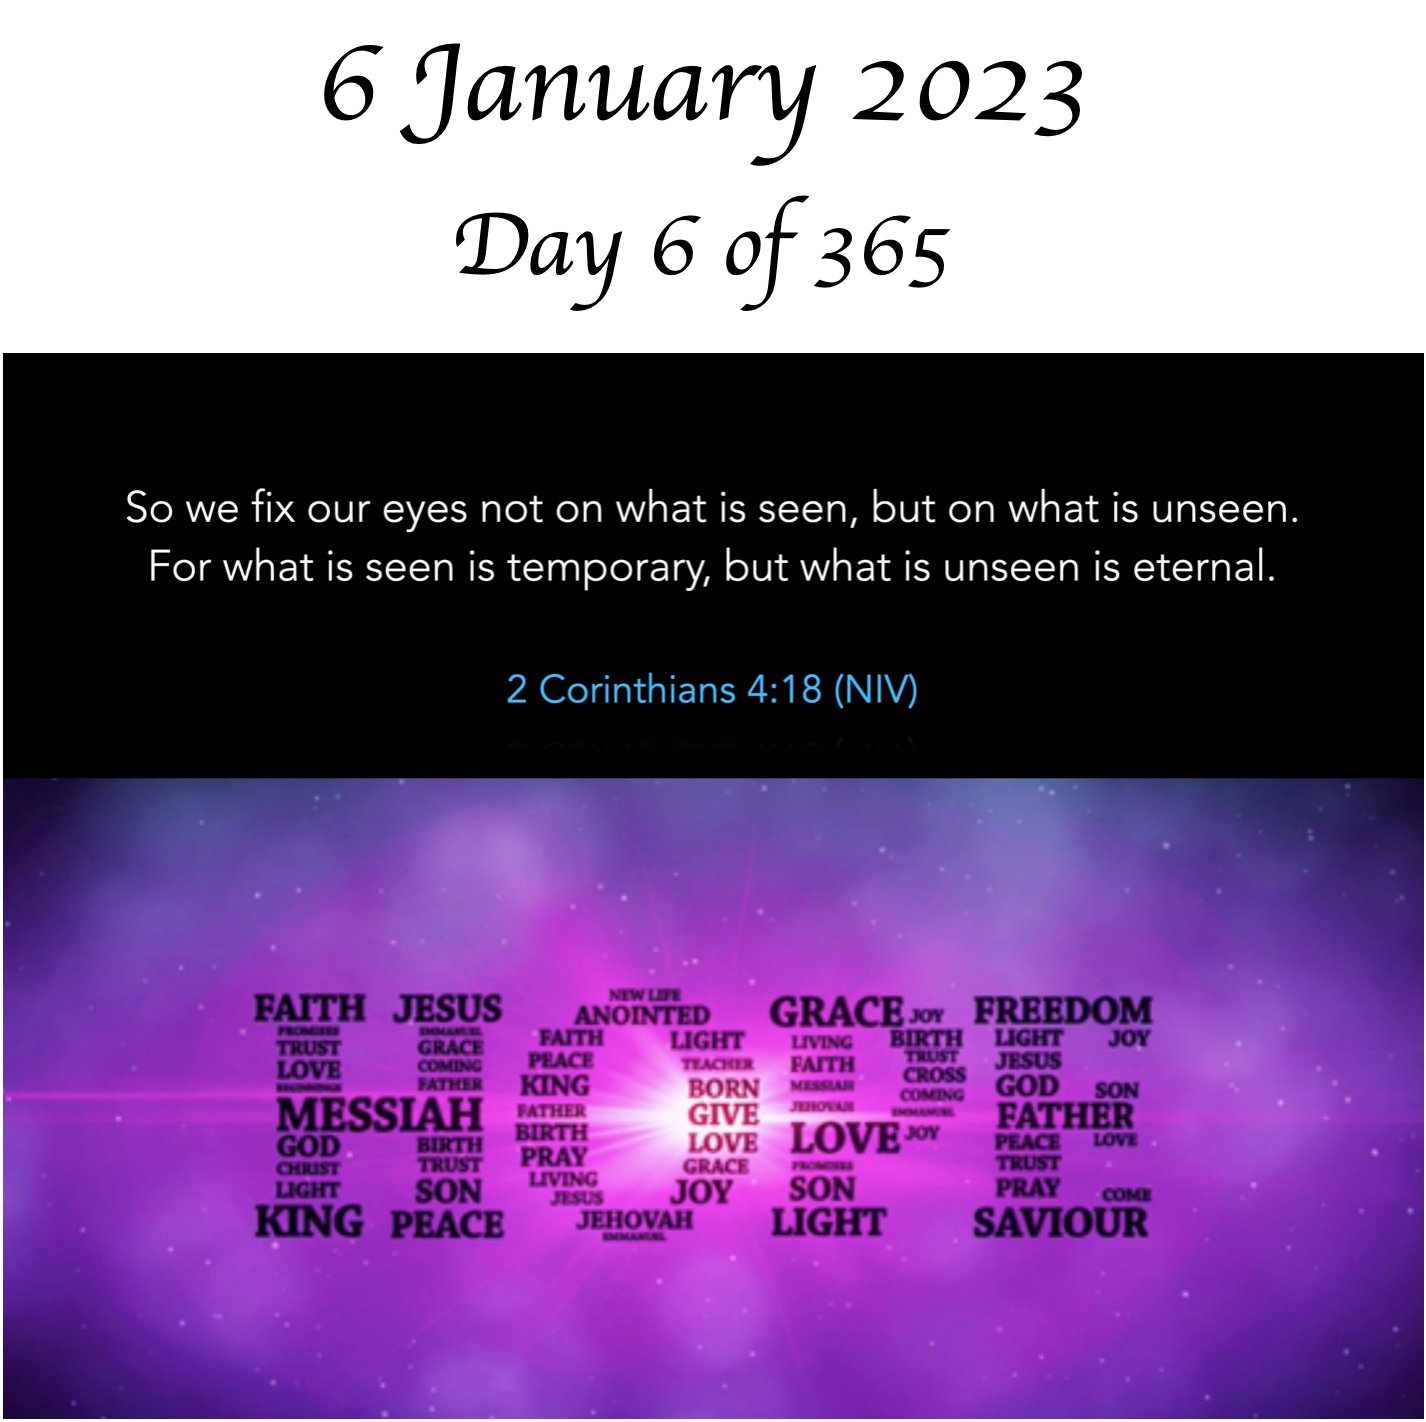 6 January 2023 6 of 365 So we fix our eyes not on what is seen, but on what is unseen. For what is seen is temporary; but what is unseen is eternal. 2 Corinthians 4:18 (NIV) FAITH   JESUS ANOINTED GRACEI FREEDOM TU UGHT EkTH Veht JoY i FH JESUS LOUE CrO KING BORN GOD So MESSLAH GIVE EATHER GOD PRAY LOVE LOVE 0 CRAO Vcin SON VuLC JOY SON PRAY KINGPEACE  JEHQHAH LIGHT SAVIOUR Day